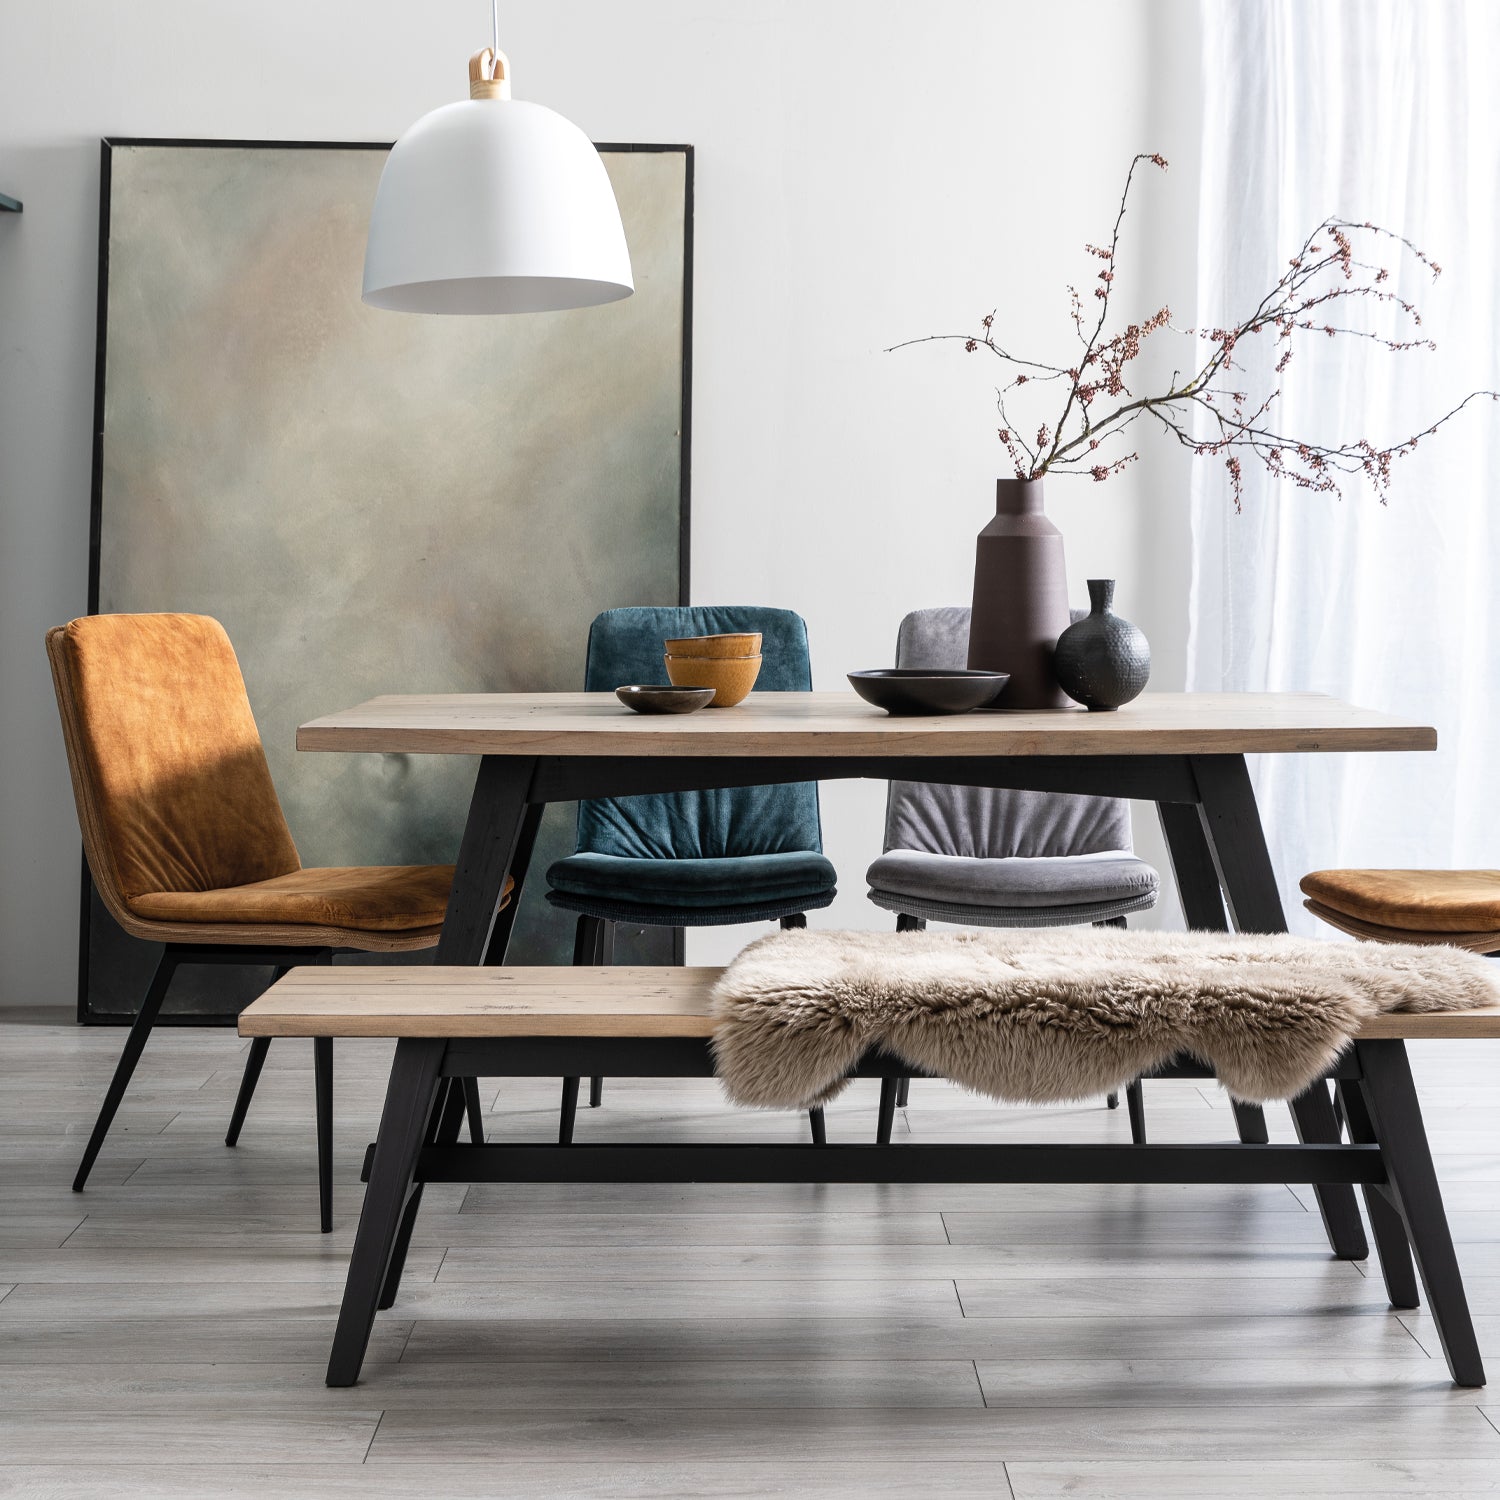 160cm Dining Table